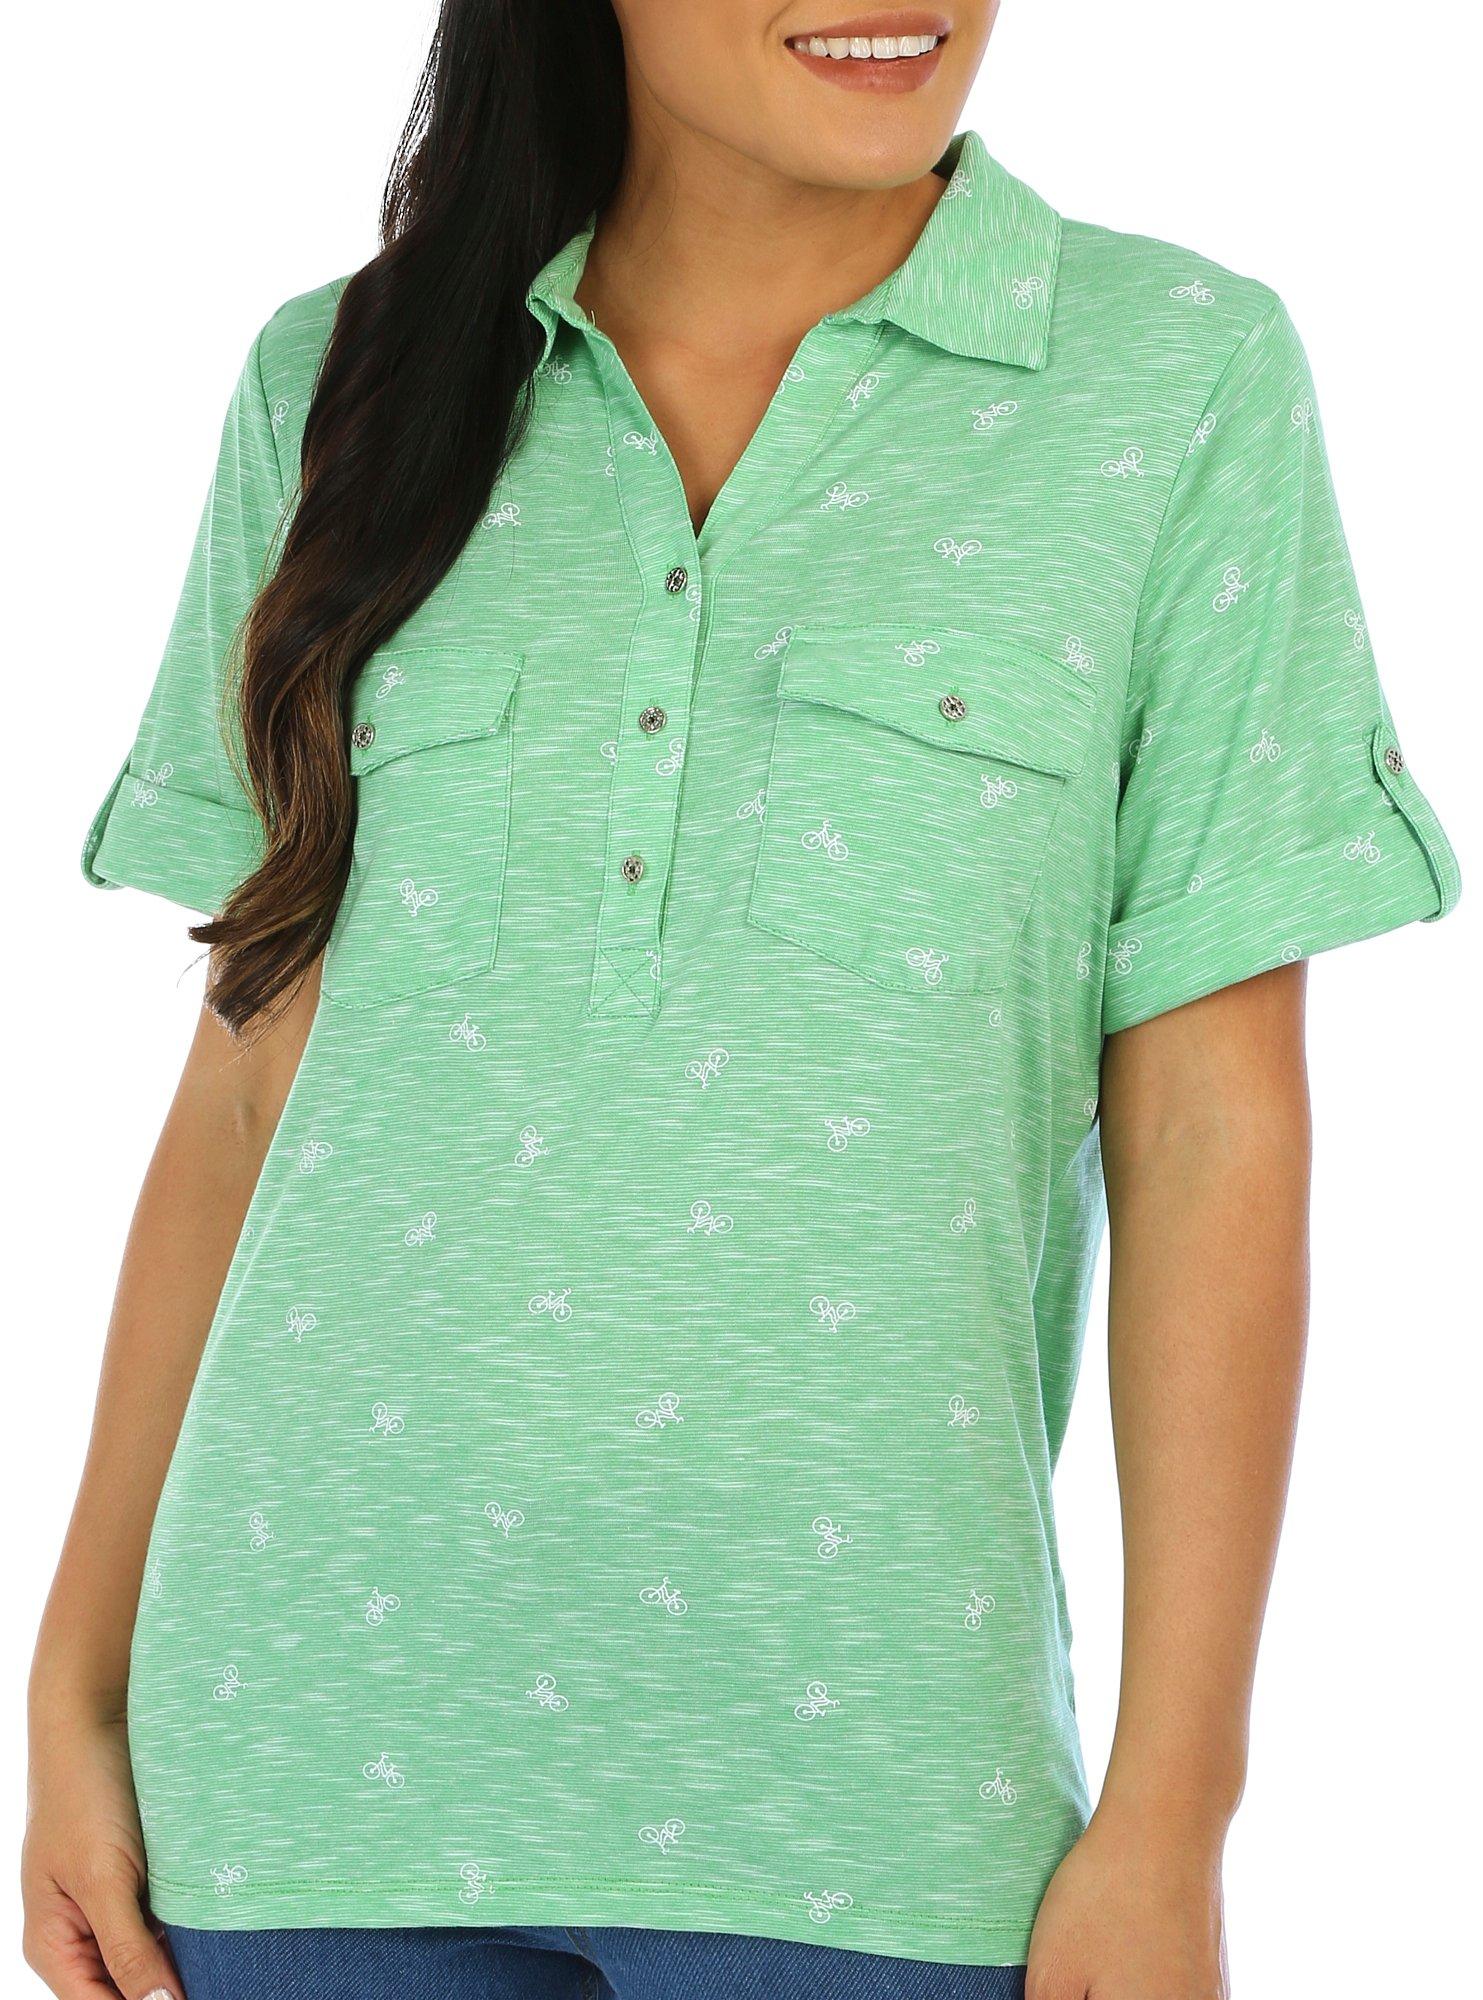 Coral Bay Misses Bicycle Space Dye Short Sleeve Polo